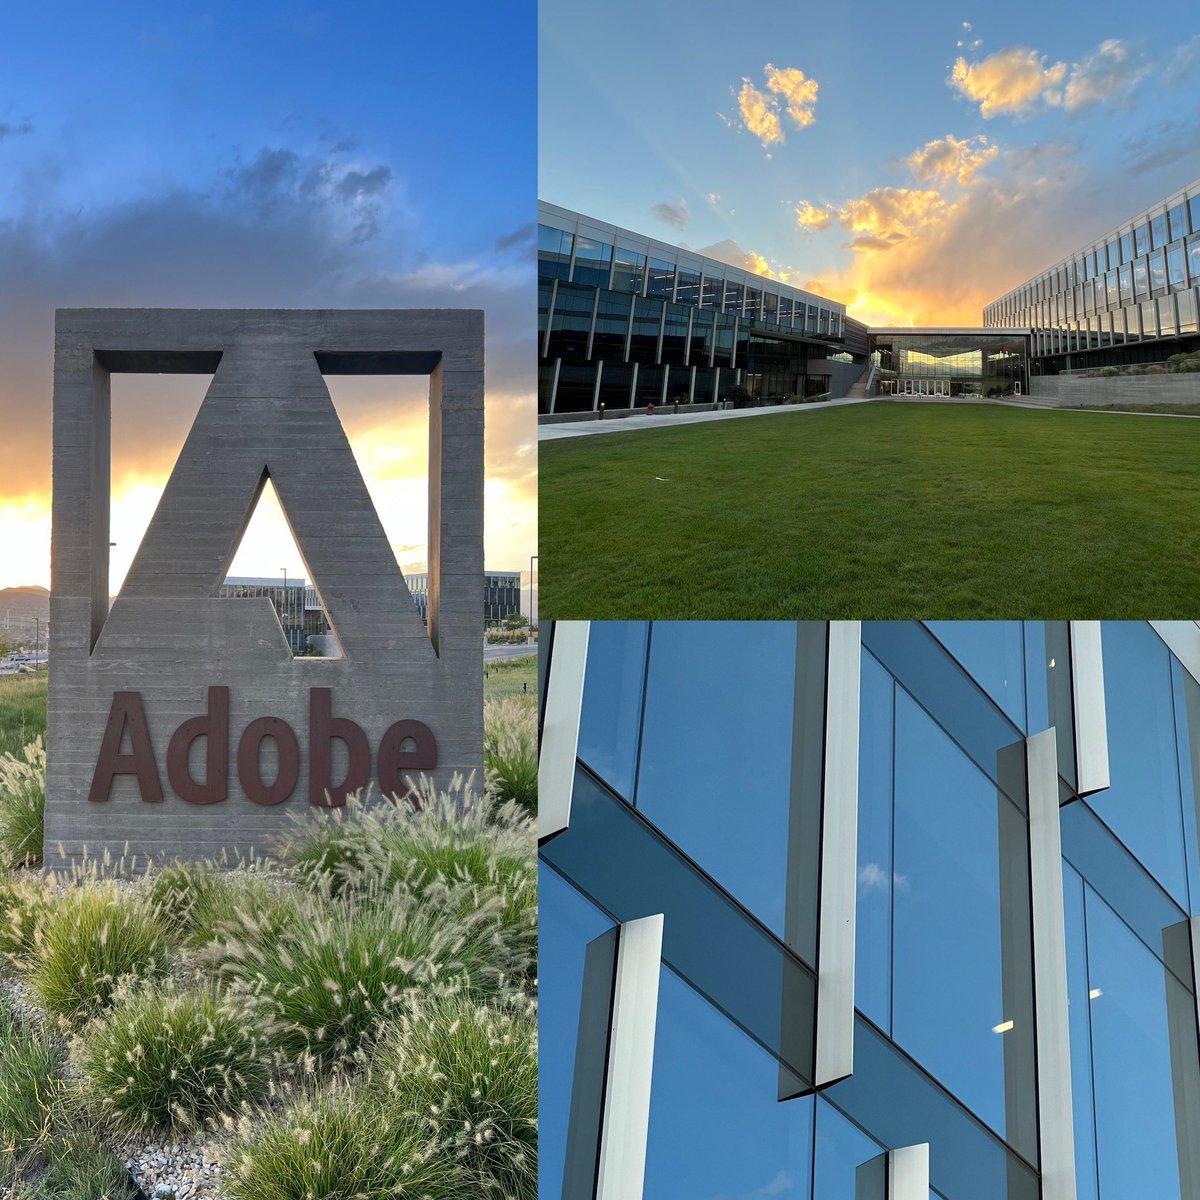 Did a little sightseeing, tech nerd style. Made it to Lehi to visit Adobe’s beautiful campus. I have been using Adobe when there was Adobe and Macromedia. #adobe #lehiutah #adobelehicampus